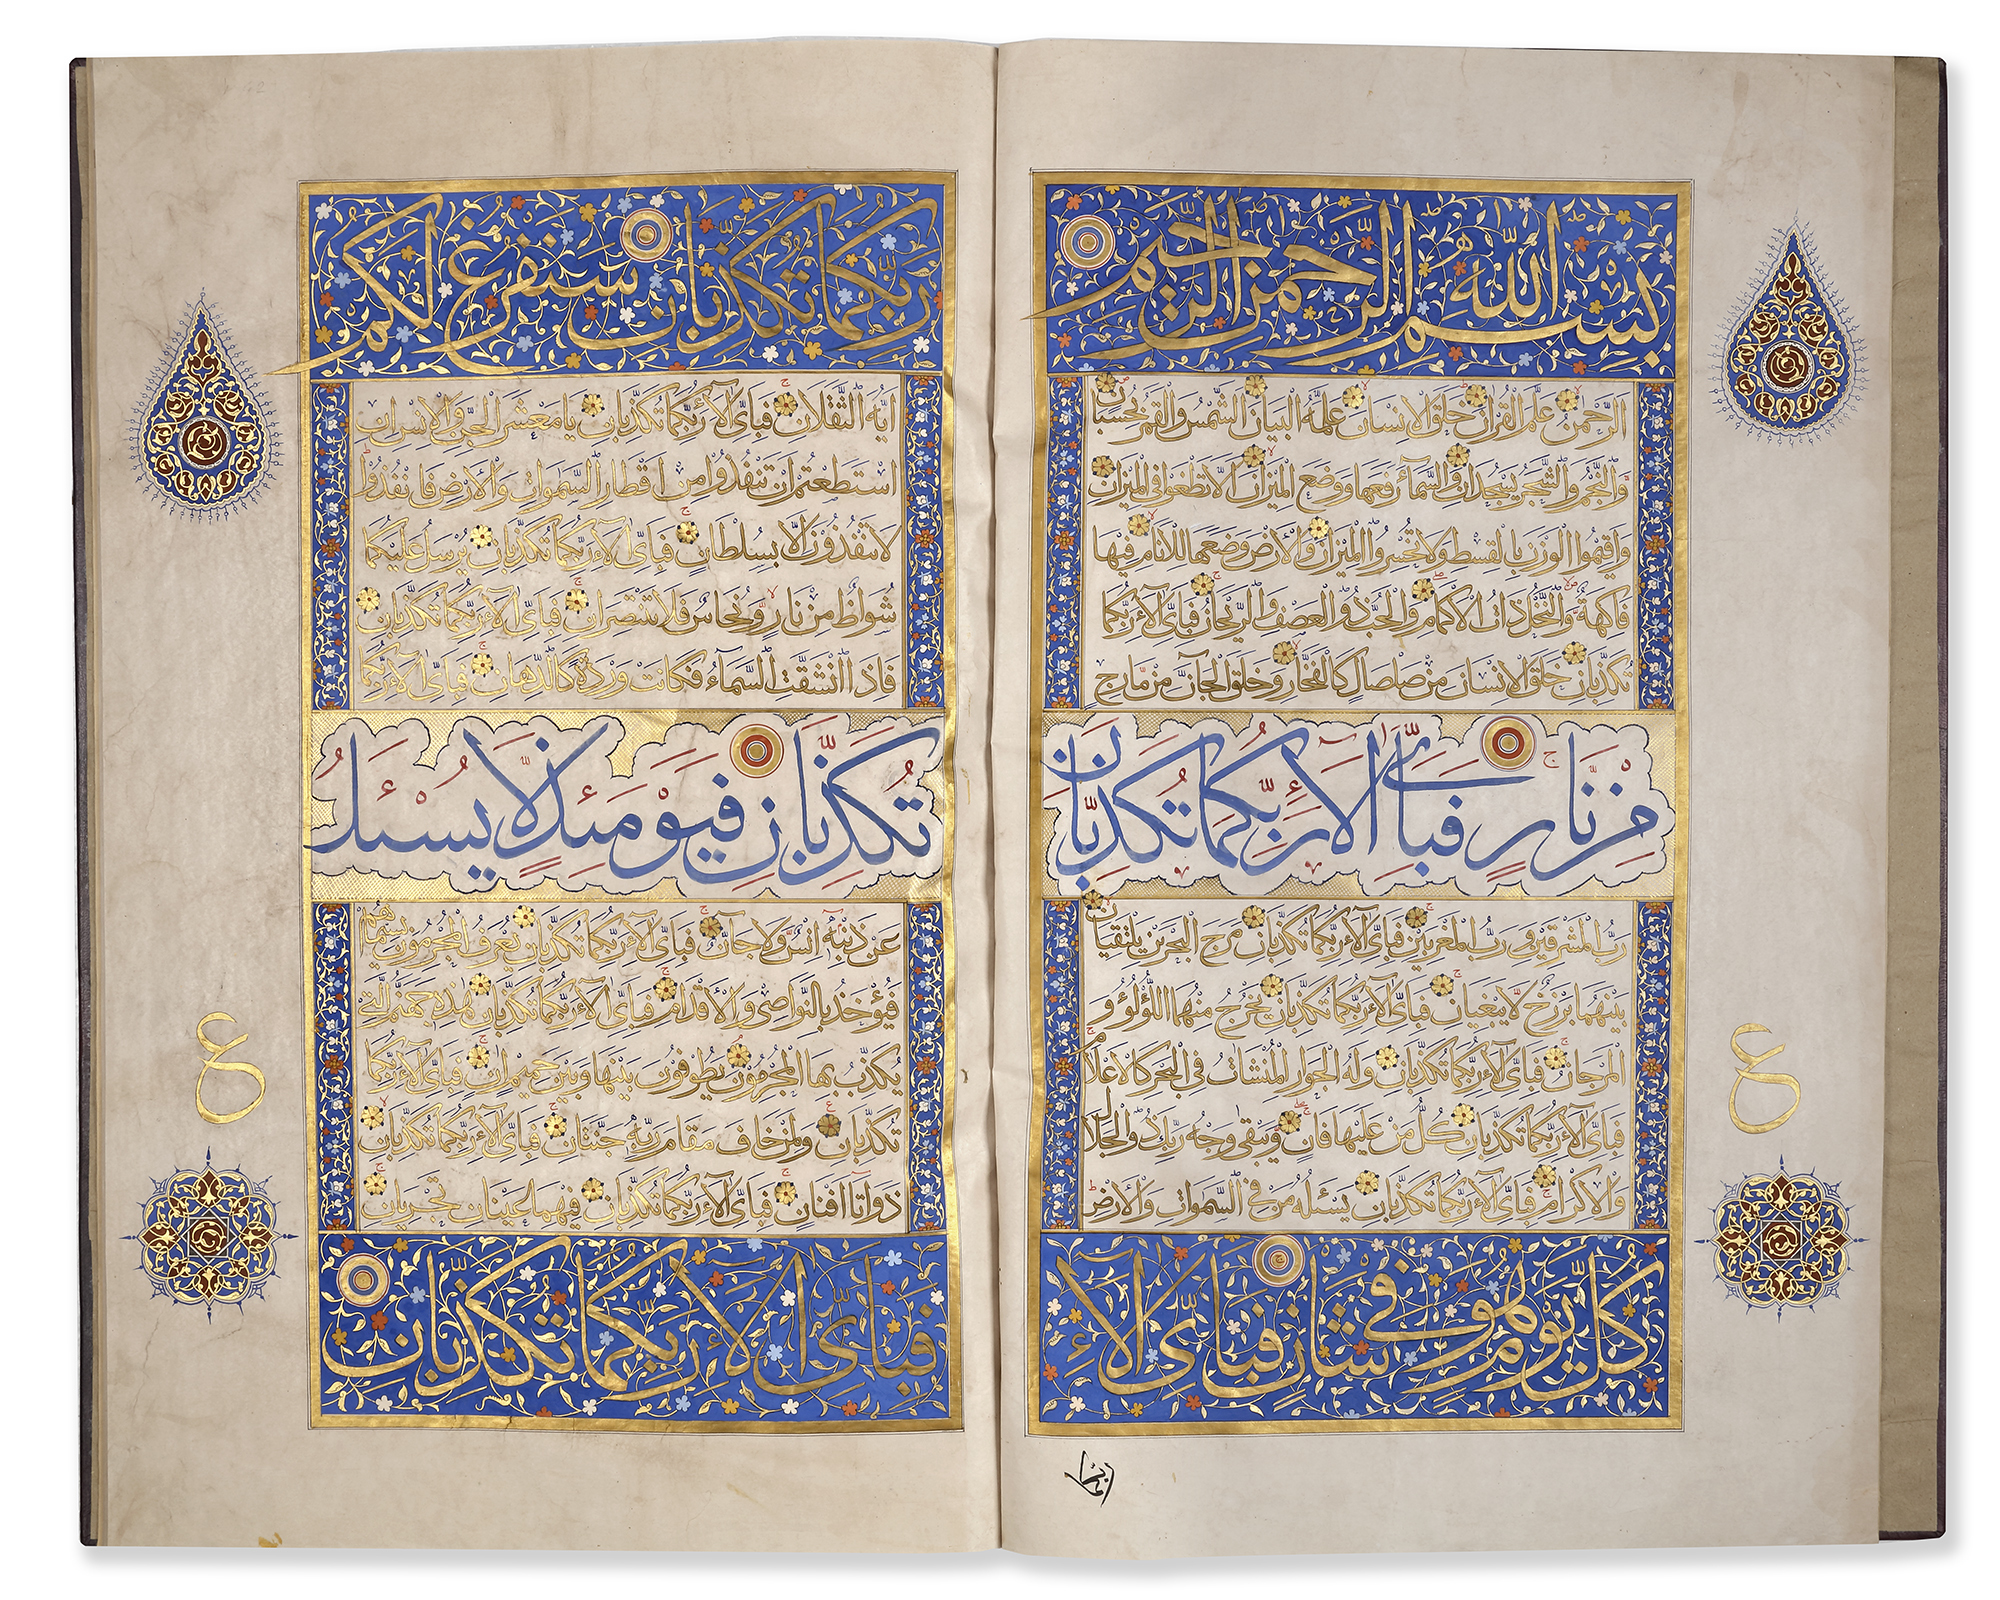 A LARGE ILLUMINATED QURAN JUZ, CENTRAL ASIA, LATE 19TH-EARLY 20TH CENTURY - Image 3 of 6